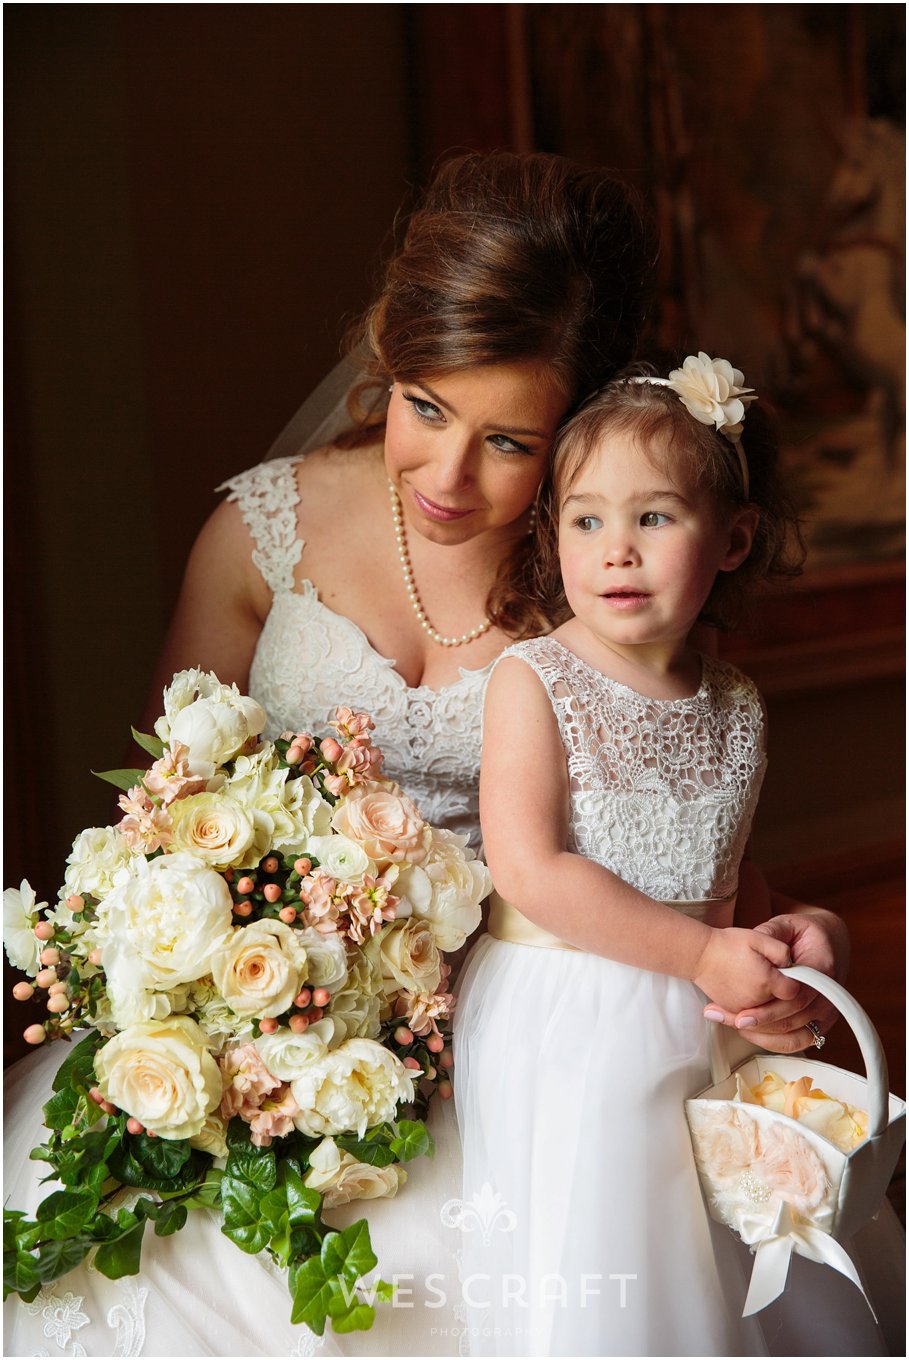 Neo-classical goodness right here. I love it when we can capture a quite moment between a bride and her flower girl. It's not always so easy! 